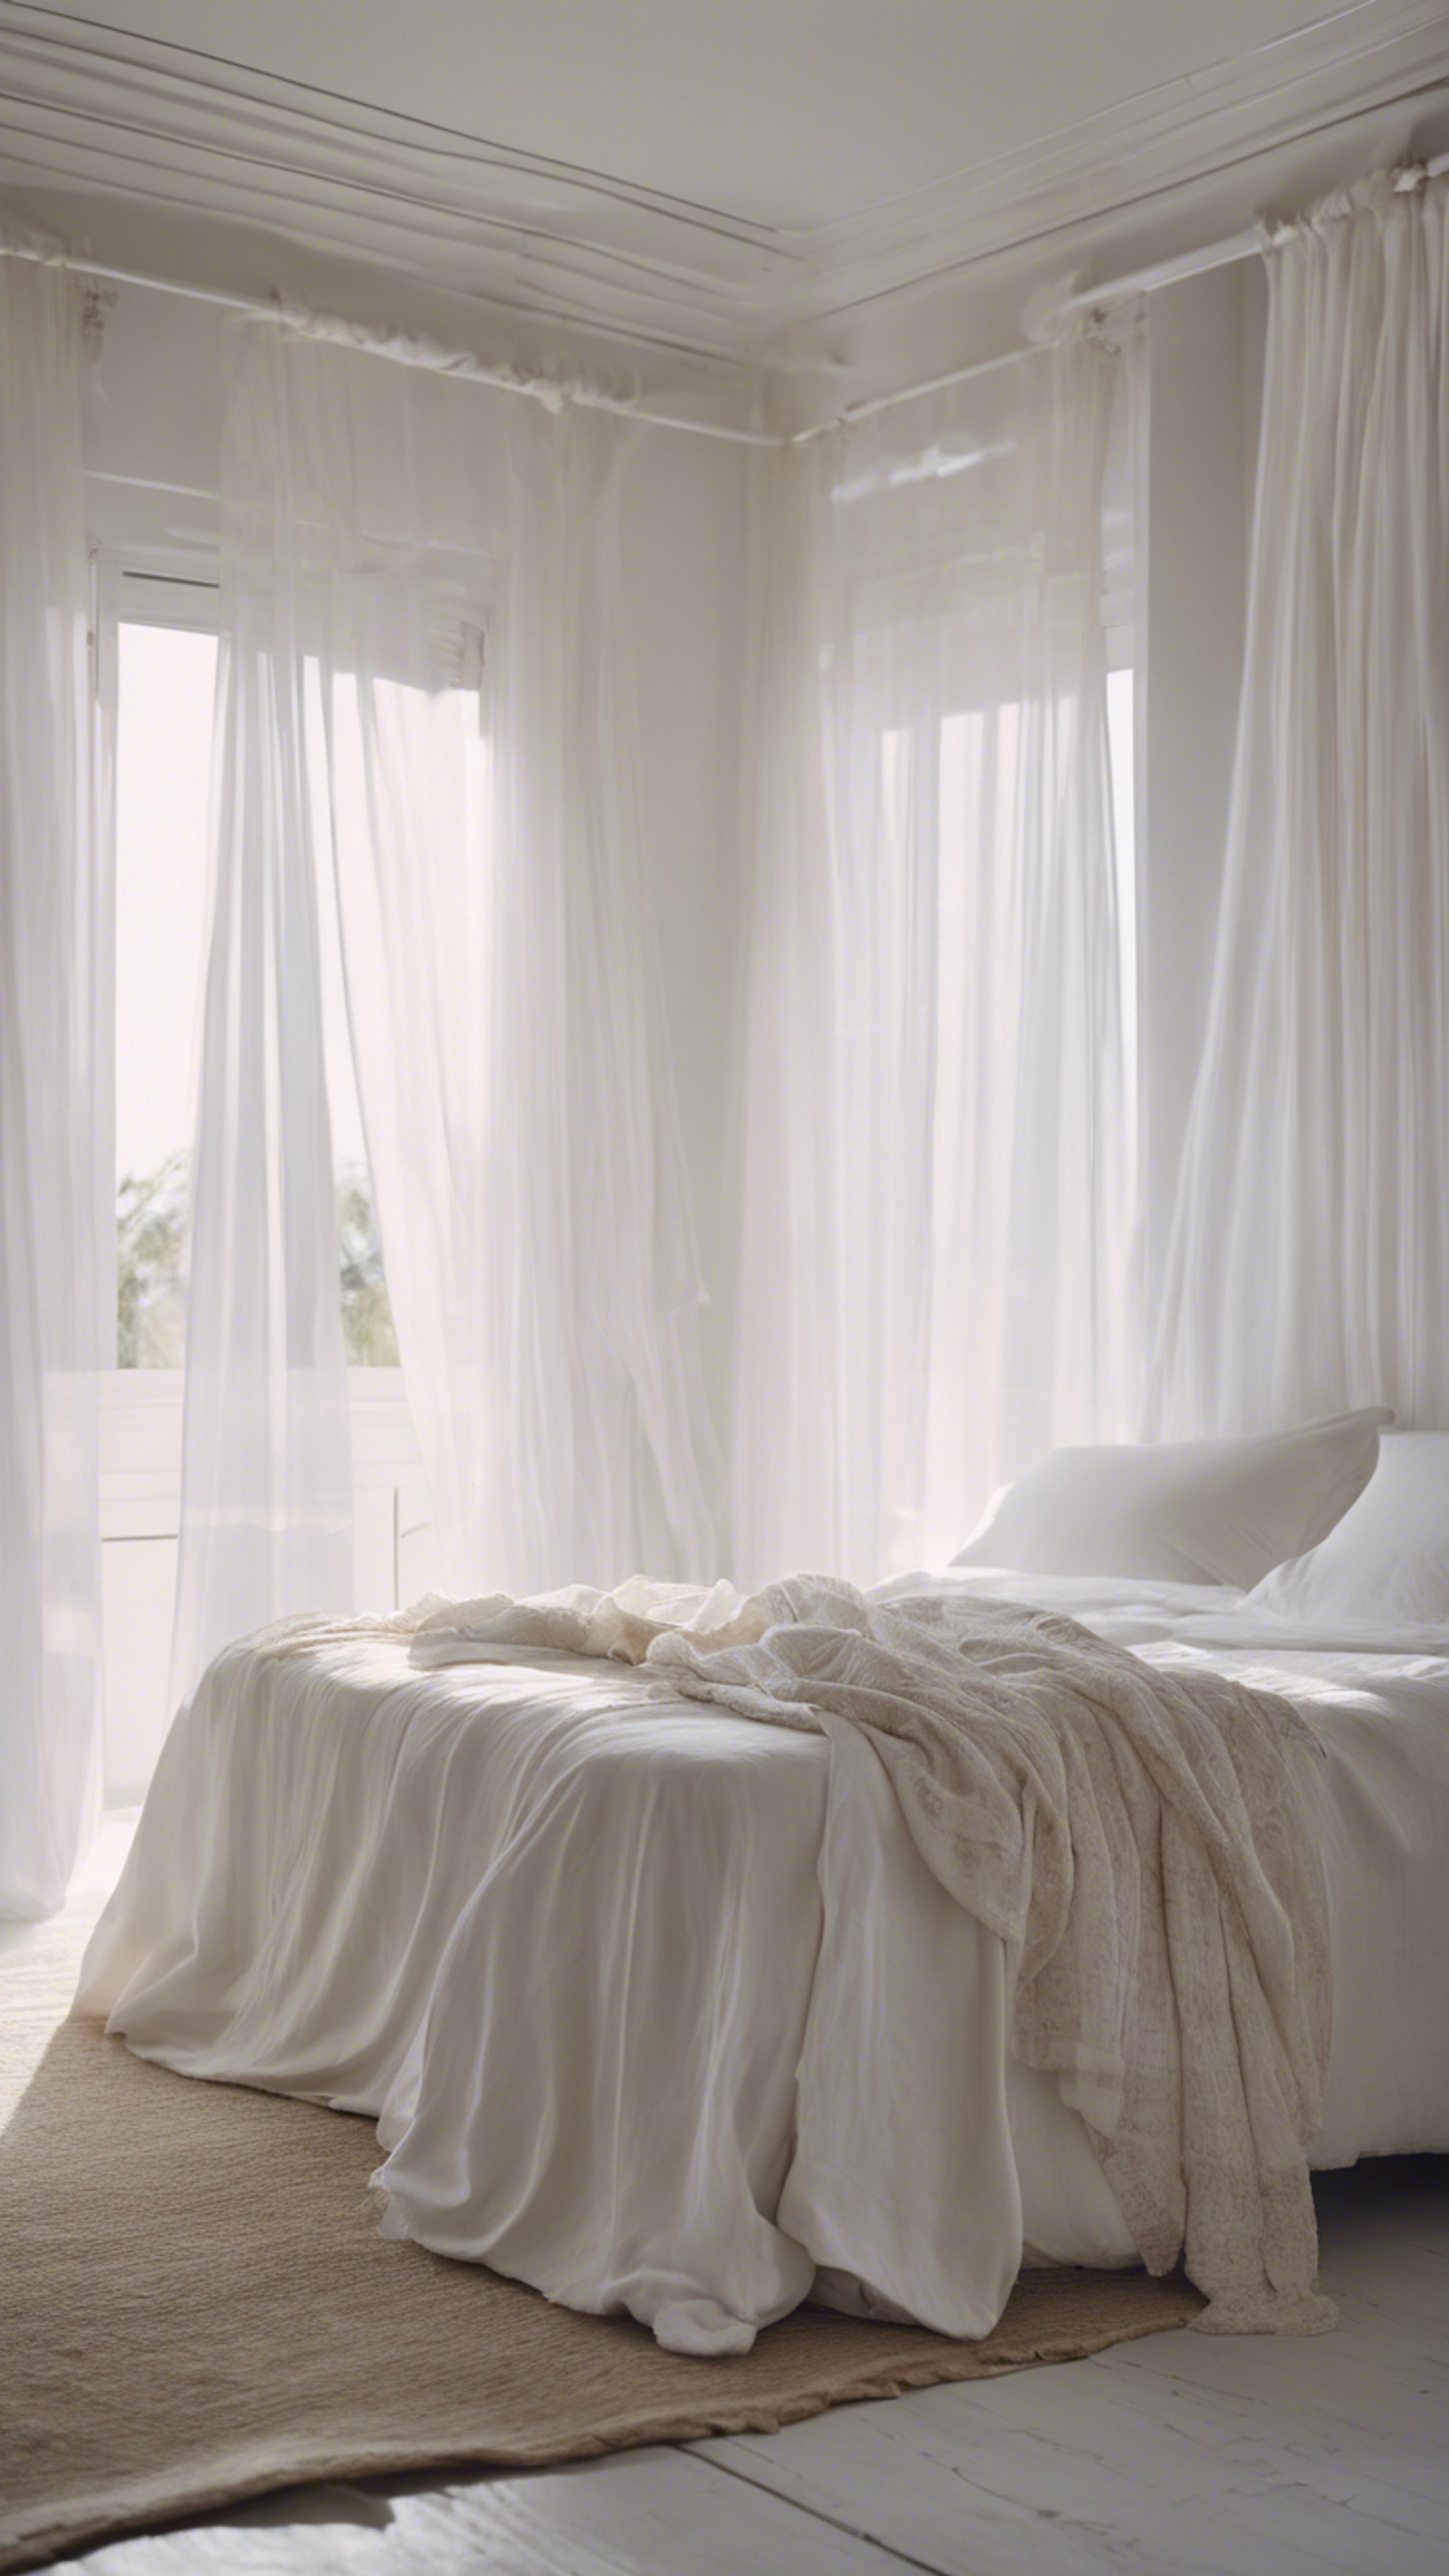 A dreamy white bedroom with sheer curtains blowing in the wind, white bed linens and an array of daylight from the window. Tapet[01f8a65ac1ab4b5d8d2d]